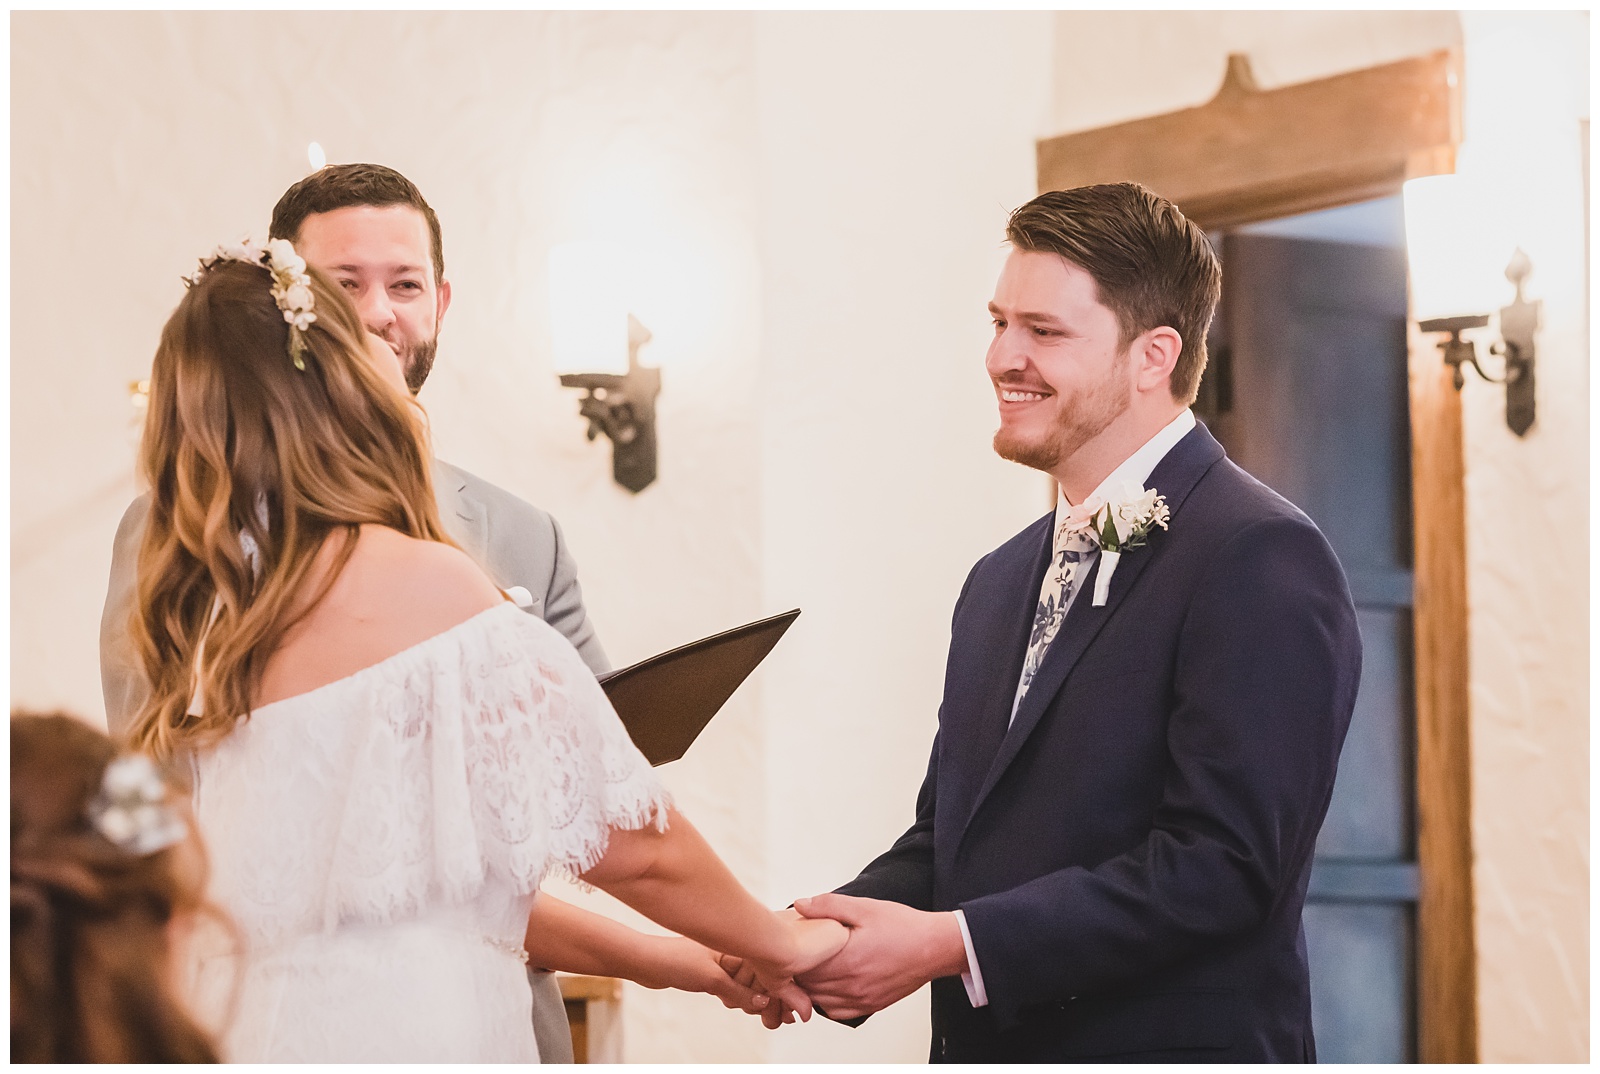 Wedding photography at St. Luke's Episcopal Church in Excelsior Springs by Kansas City wedding photographers Wisdom-Watson Weddings.